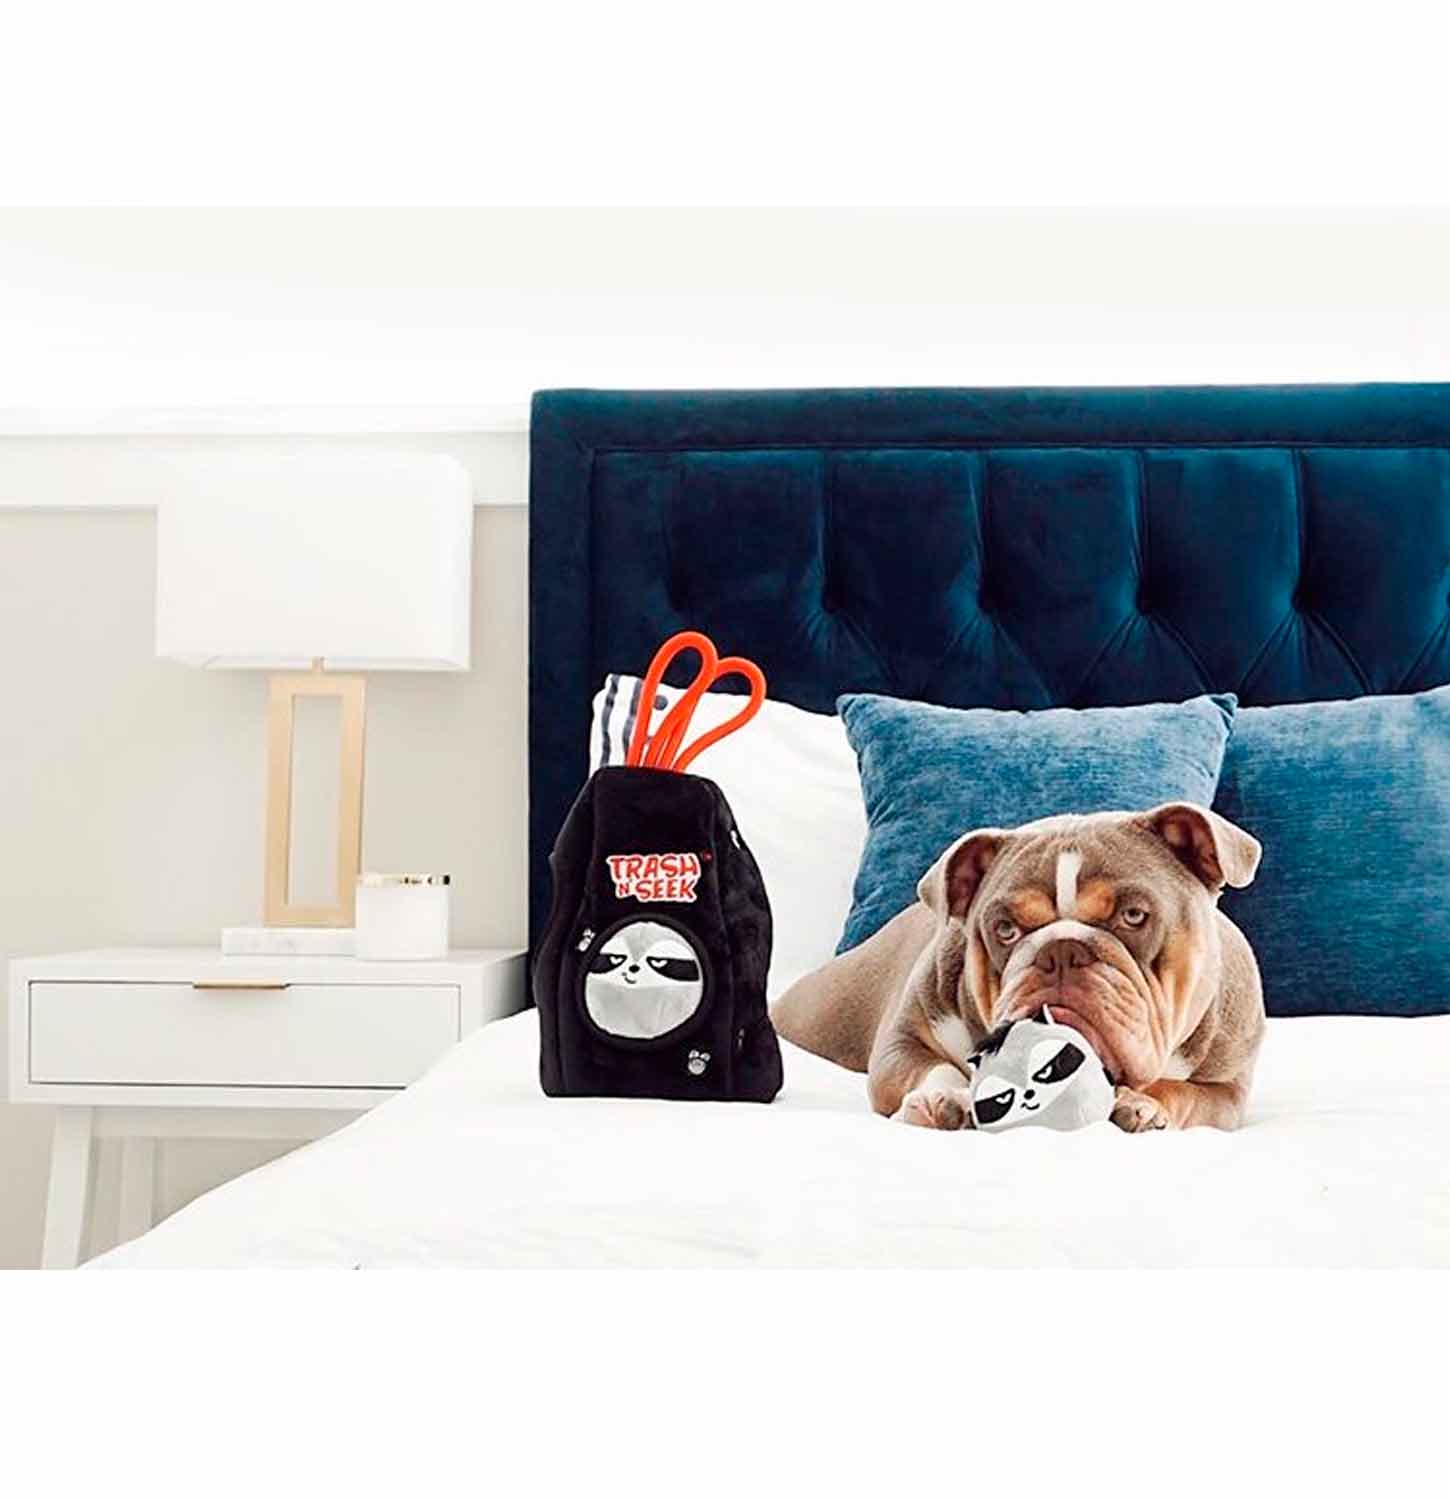 Brown Bulldog playing with Trash N' Seek Toy on a bed